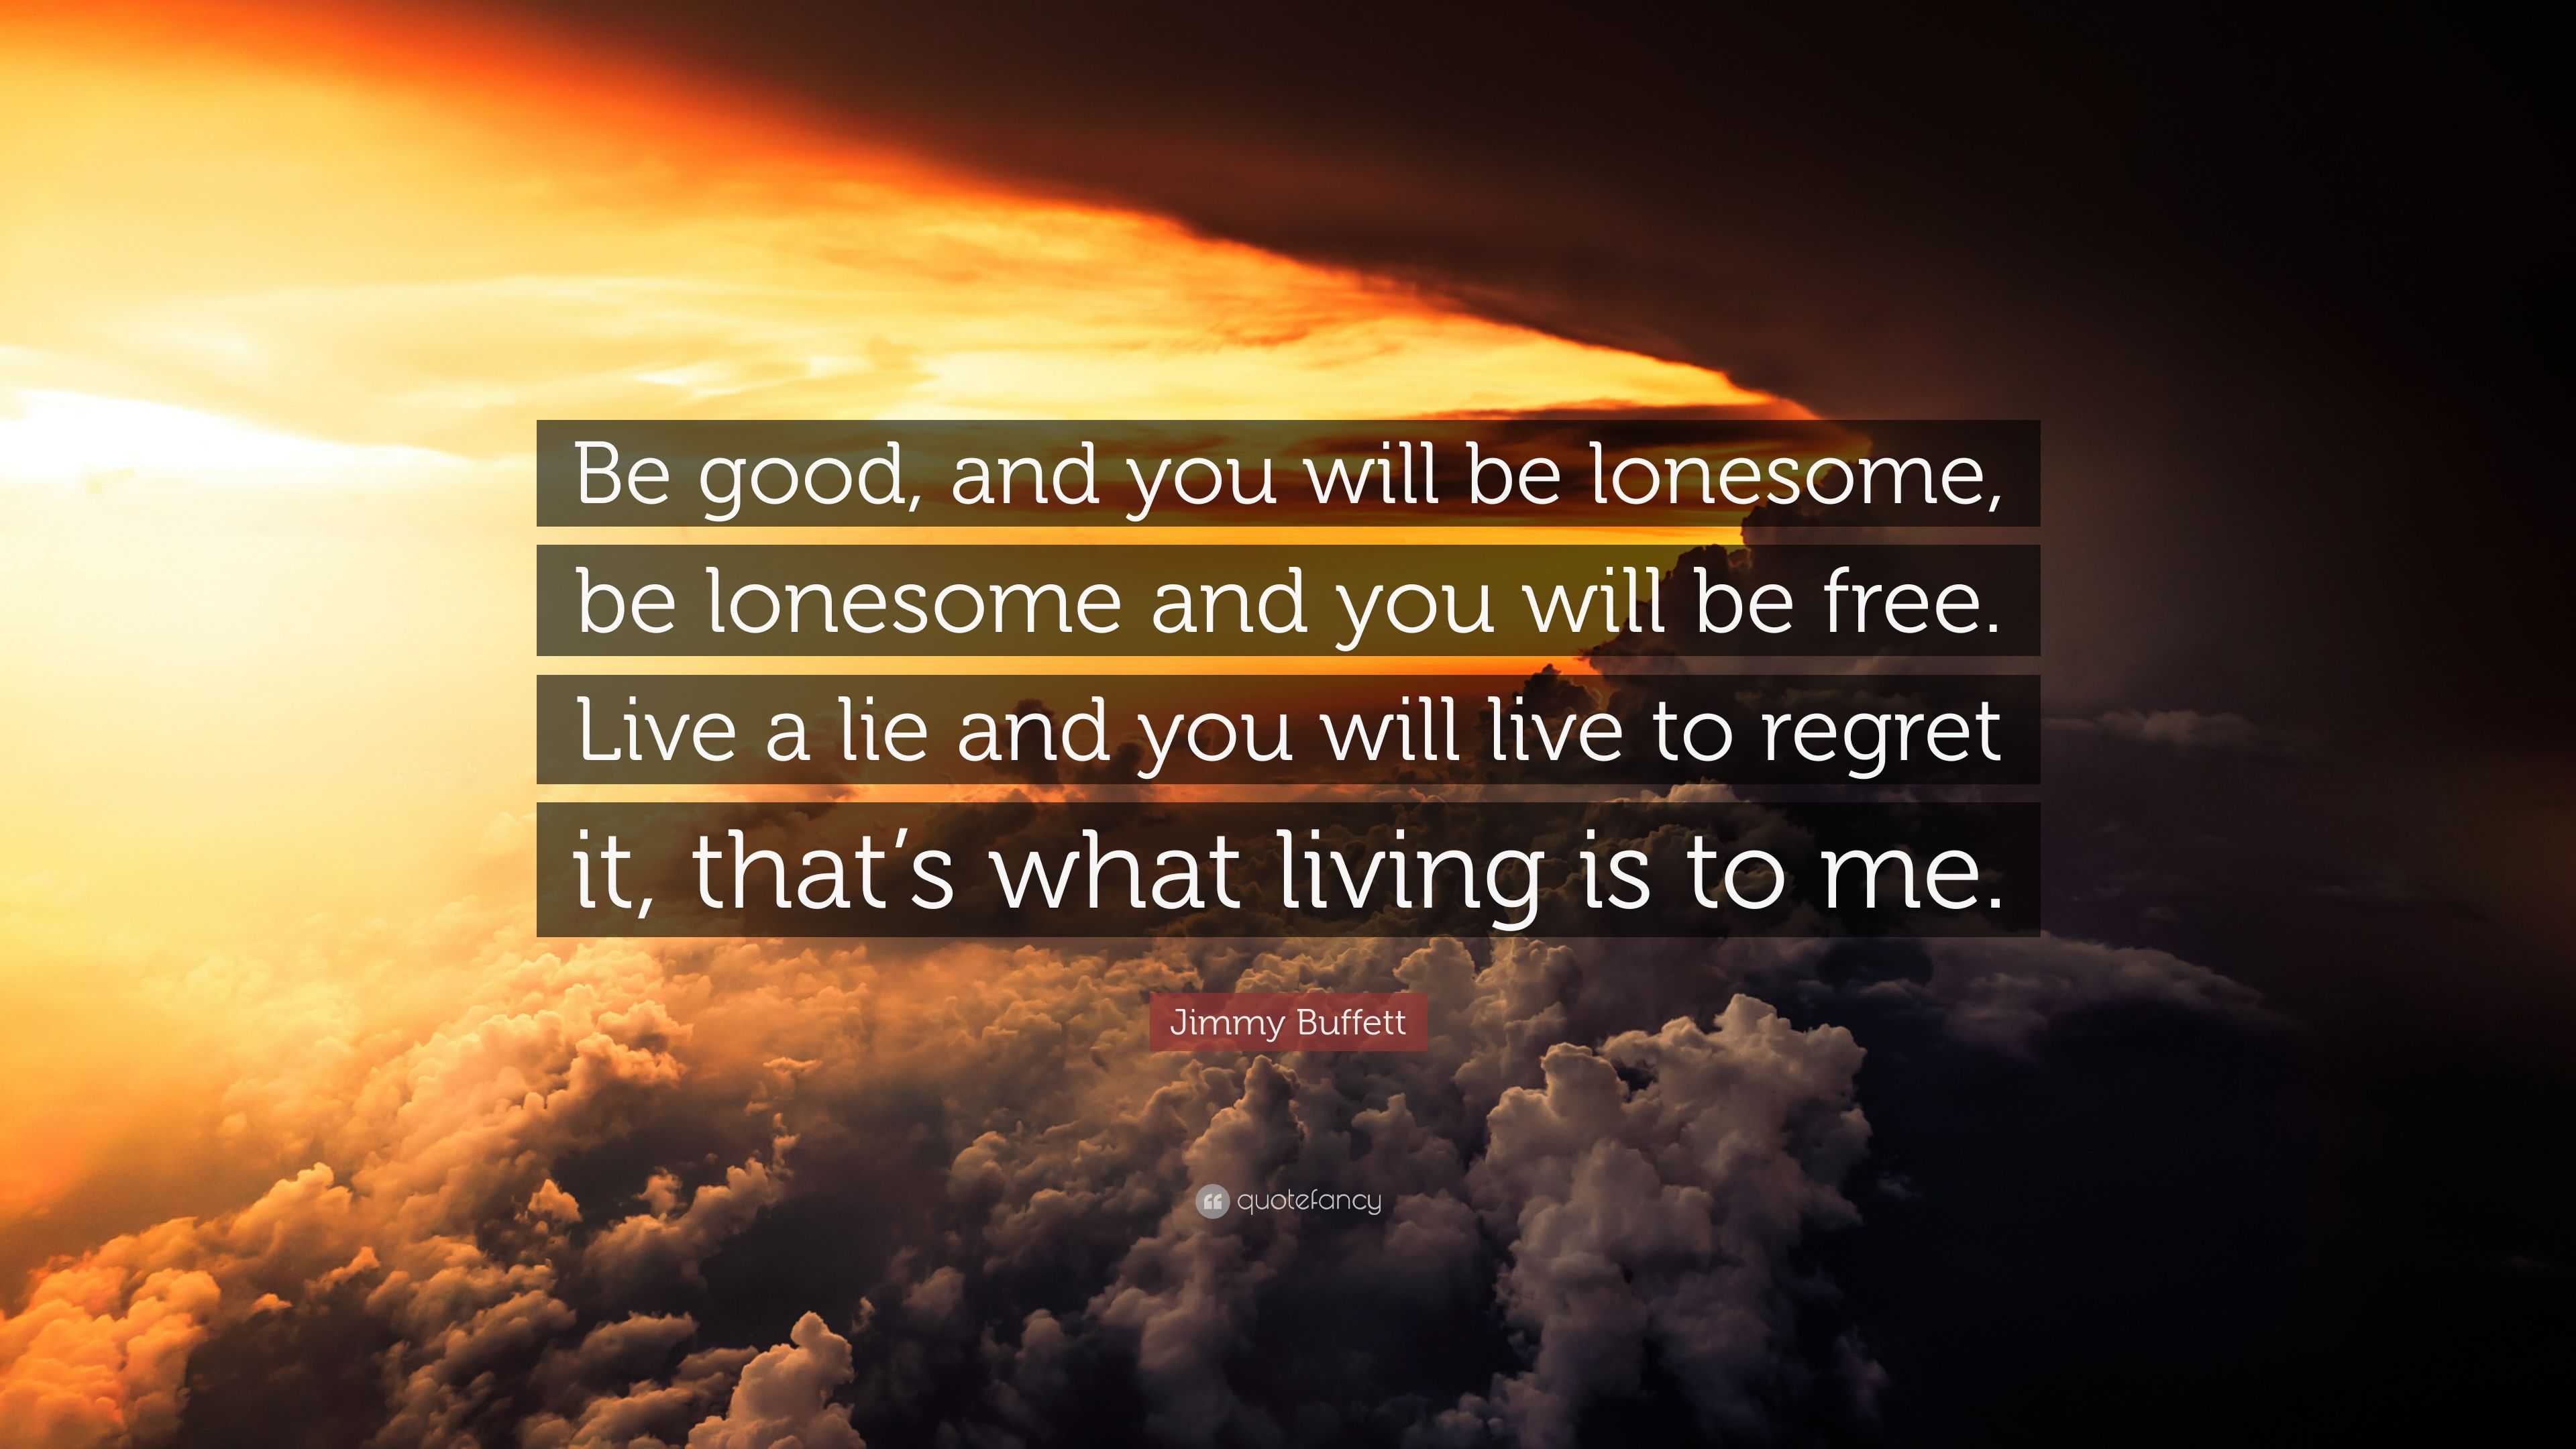 Jimmy Buffett Quote: “Be good, and you will be lonesome, be lonesome ...